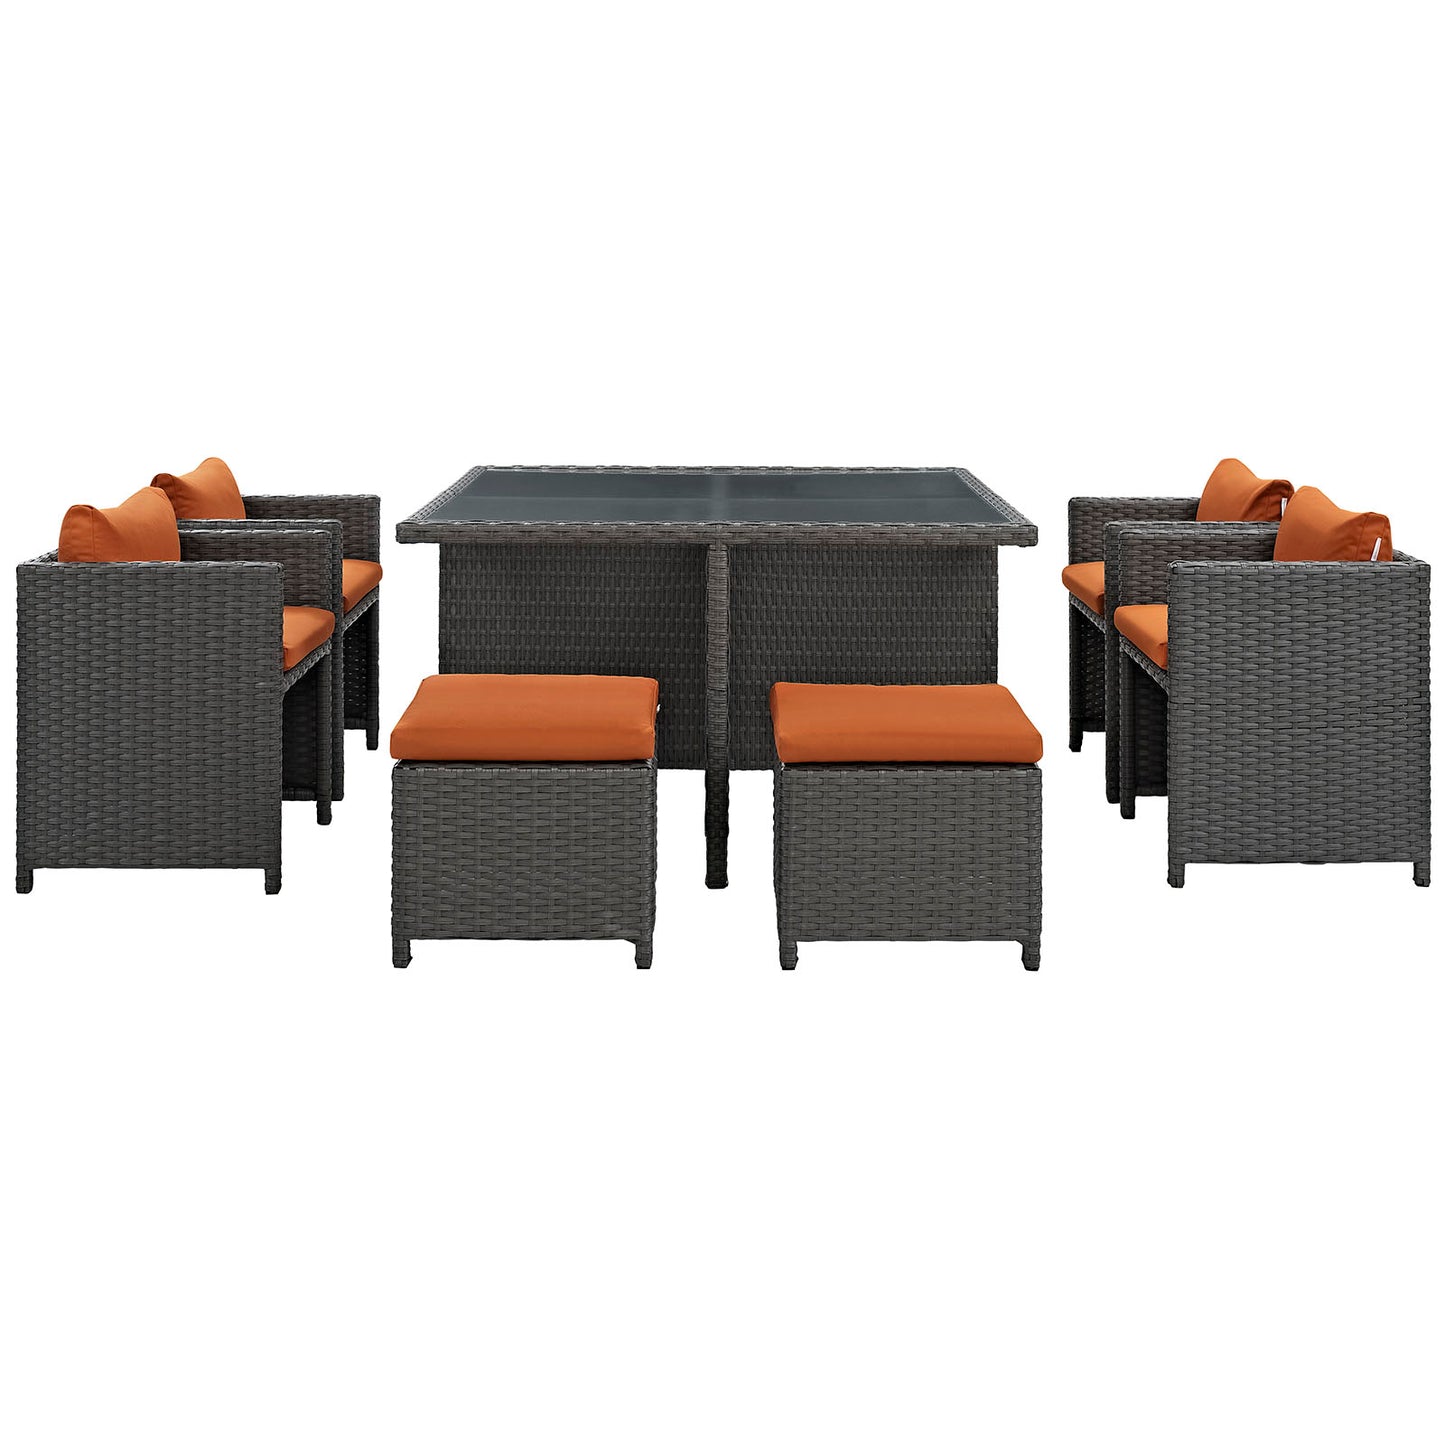 Modway Sojourn 9 Piece Outdoor Patio Glass Top Dining Set - EEI-1946